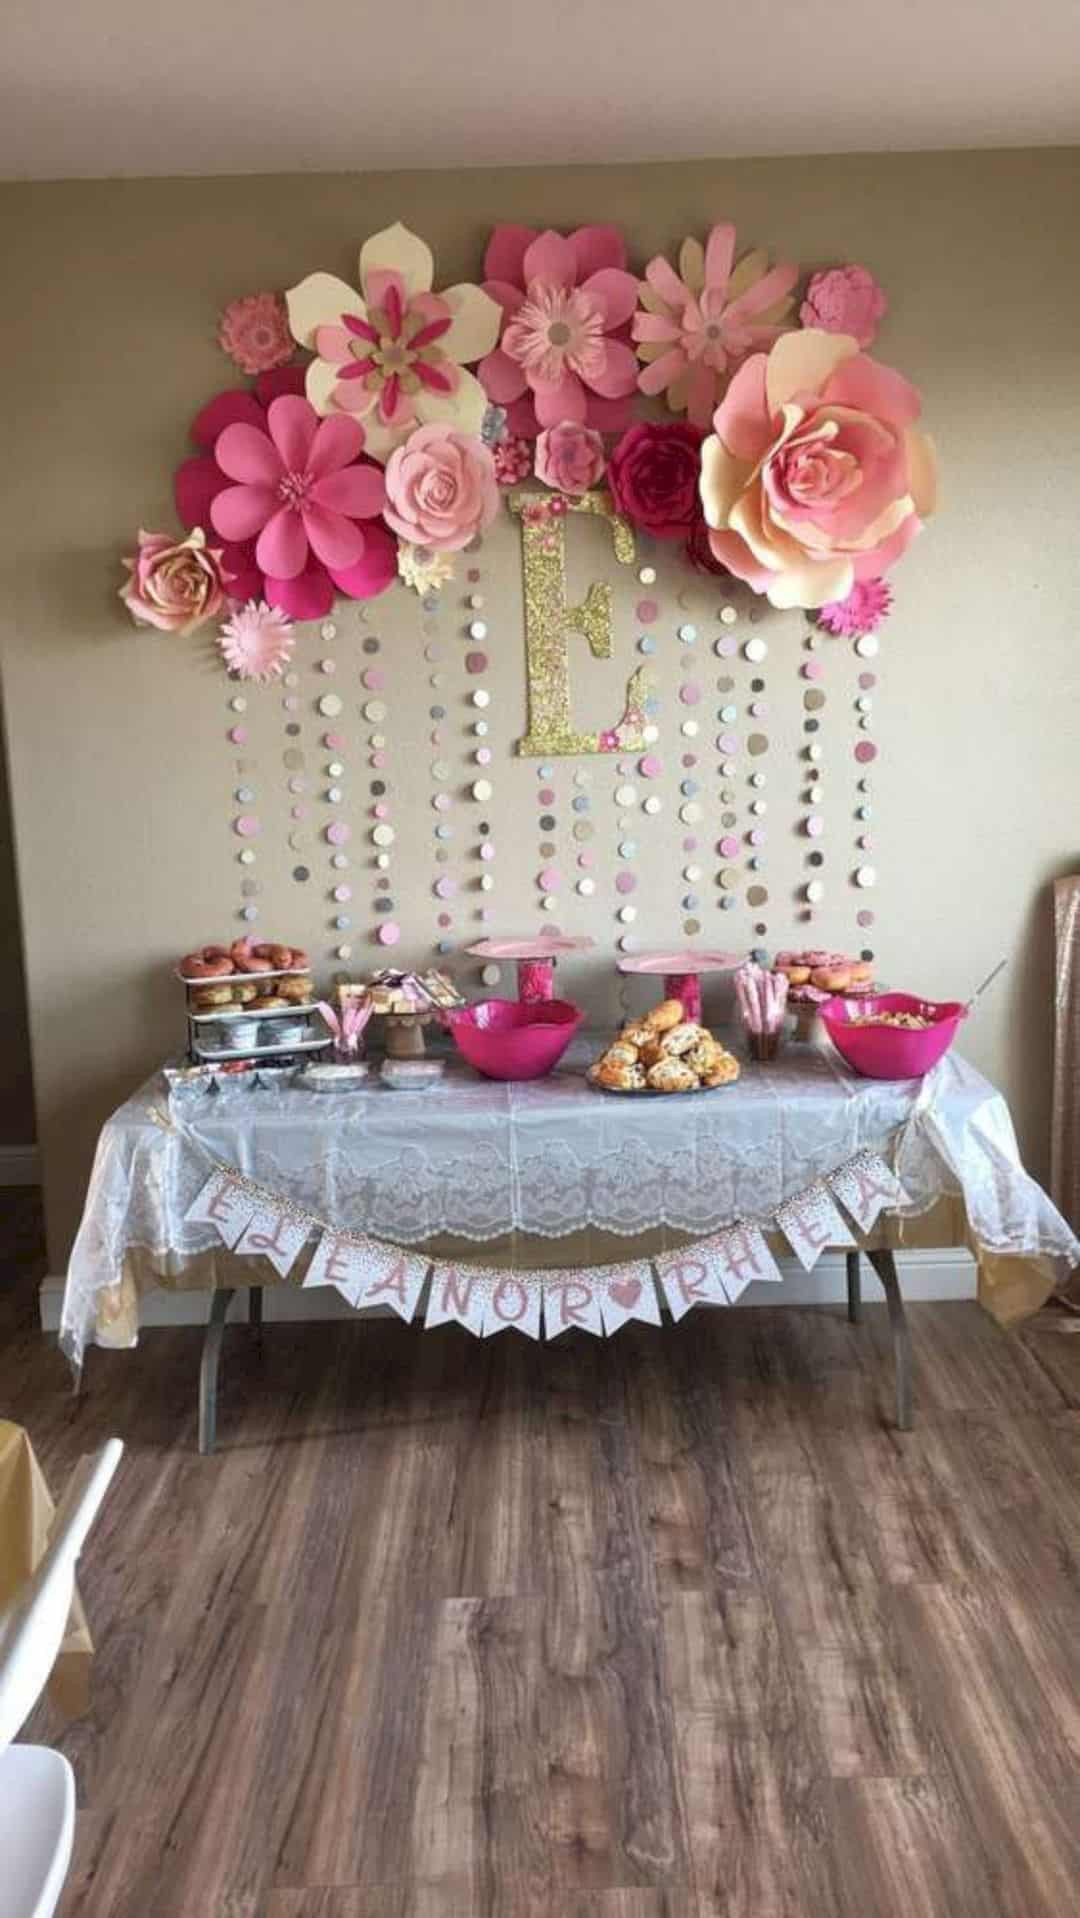 Baby Shower Girl Ideas Decorations
 16 Cute Baby Shower Decorating Ideas